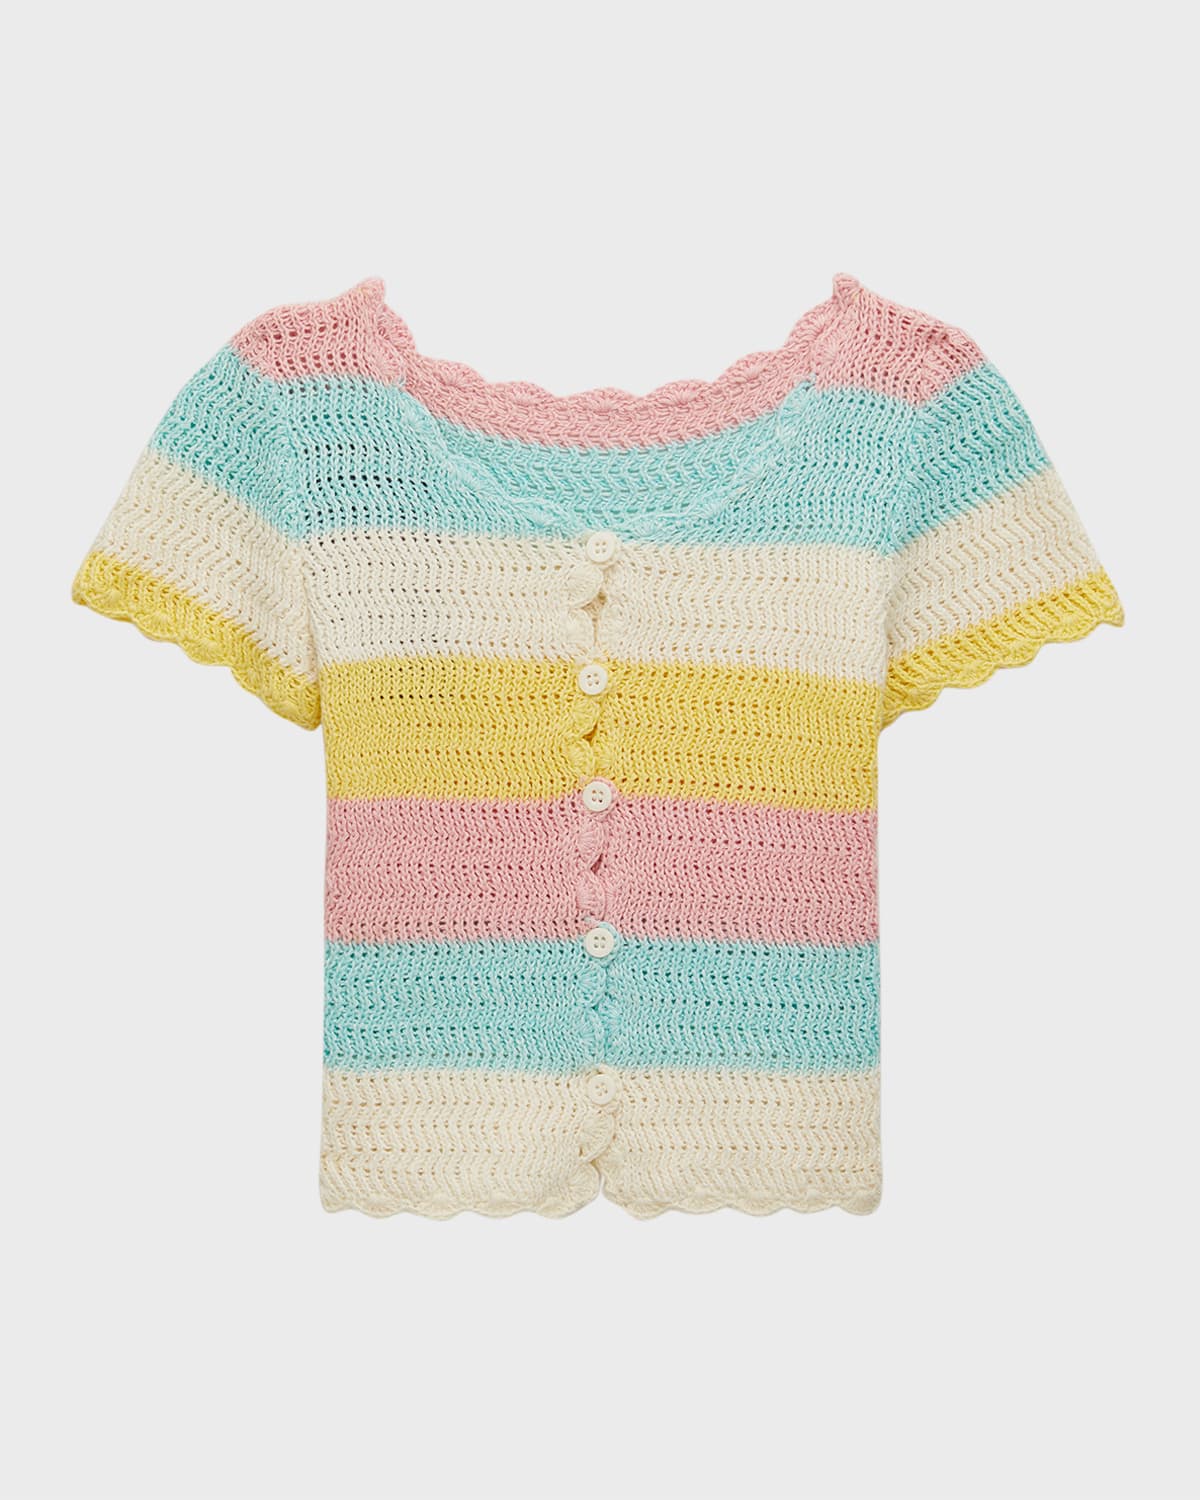 Girl's Striped Knit Top, Size 4-6